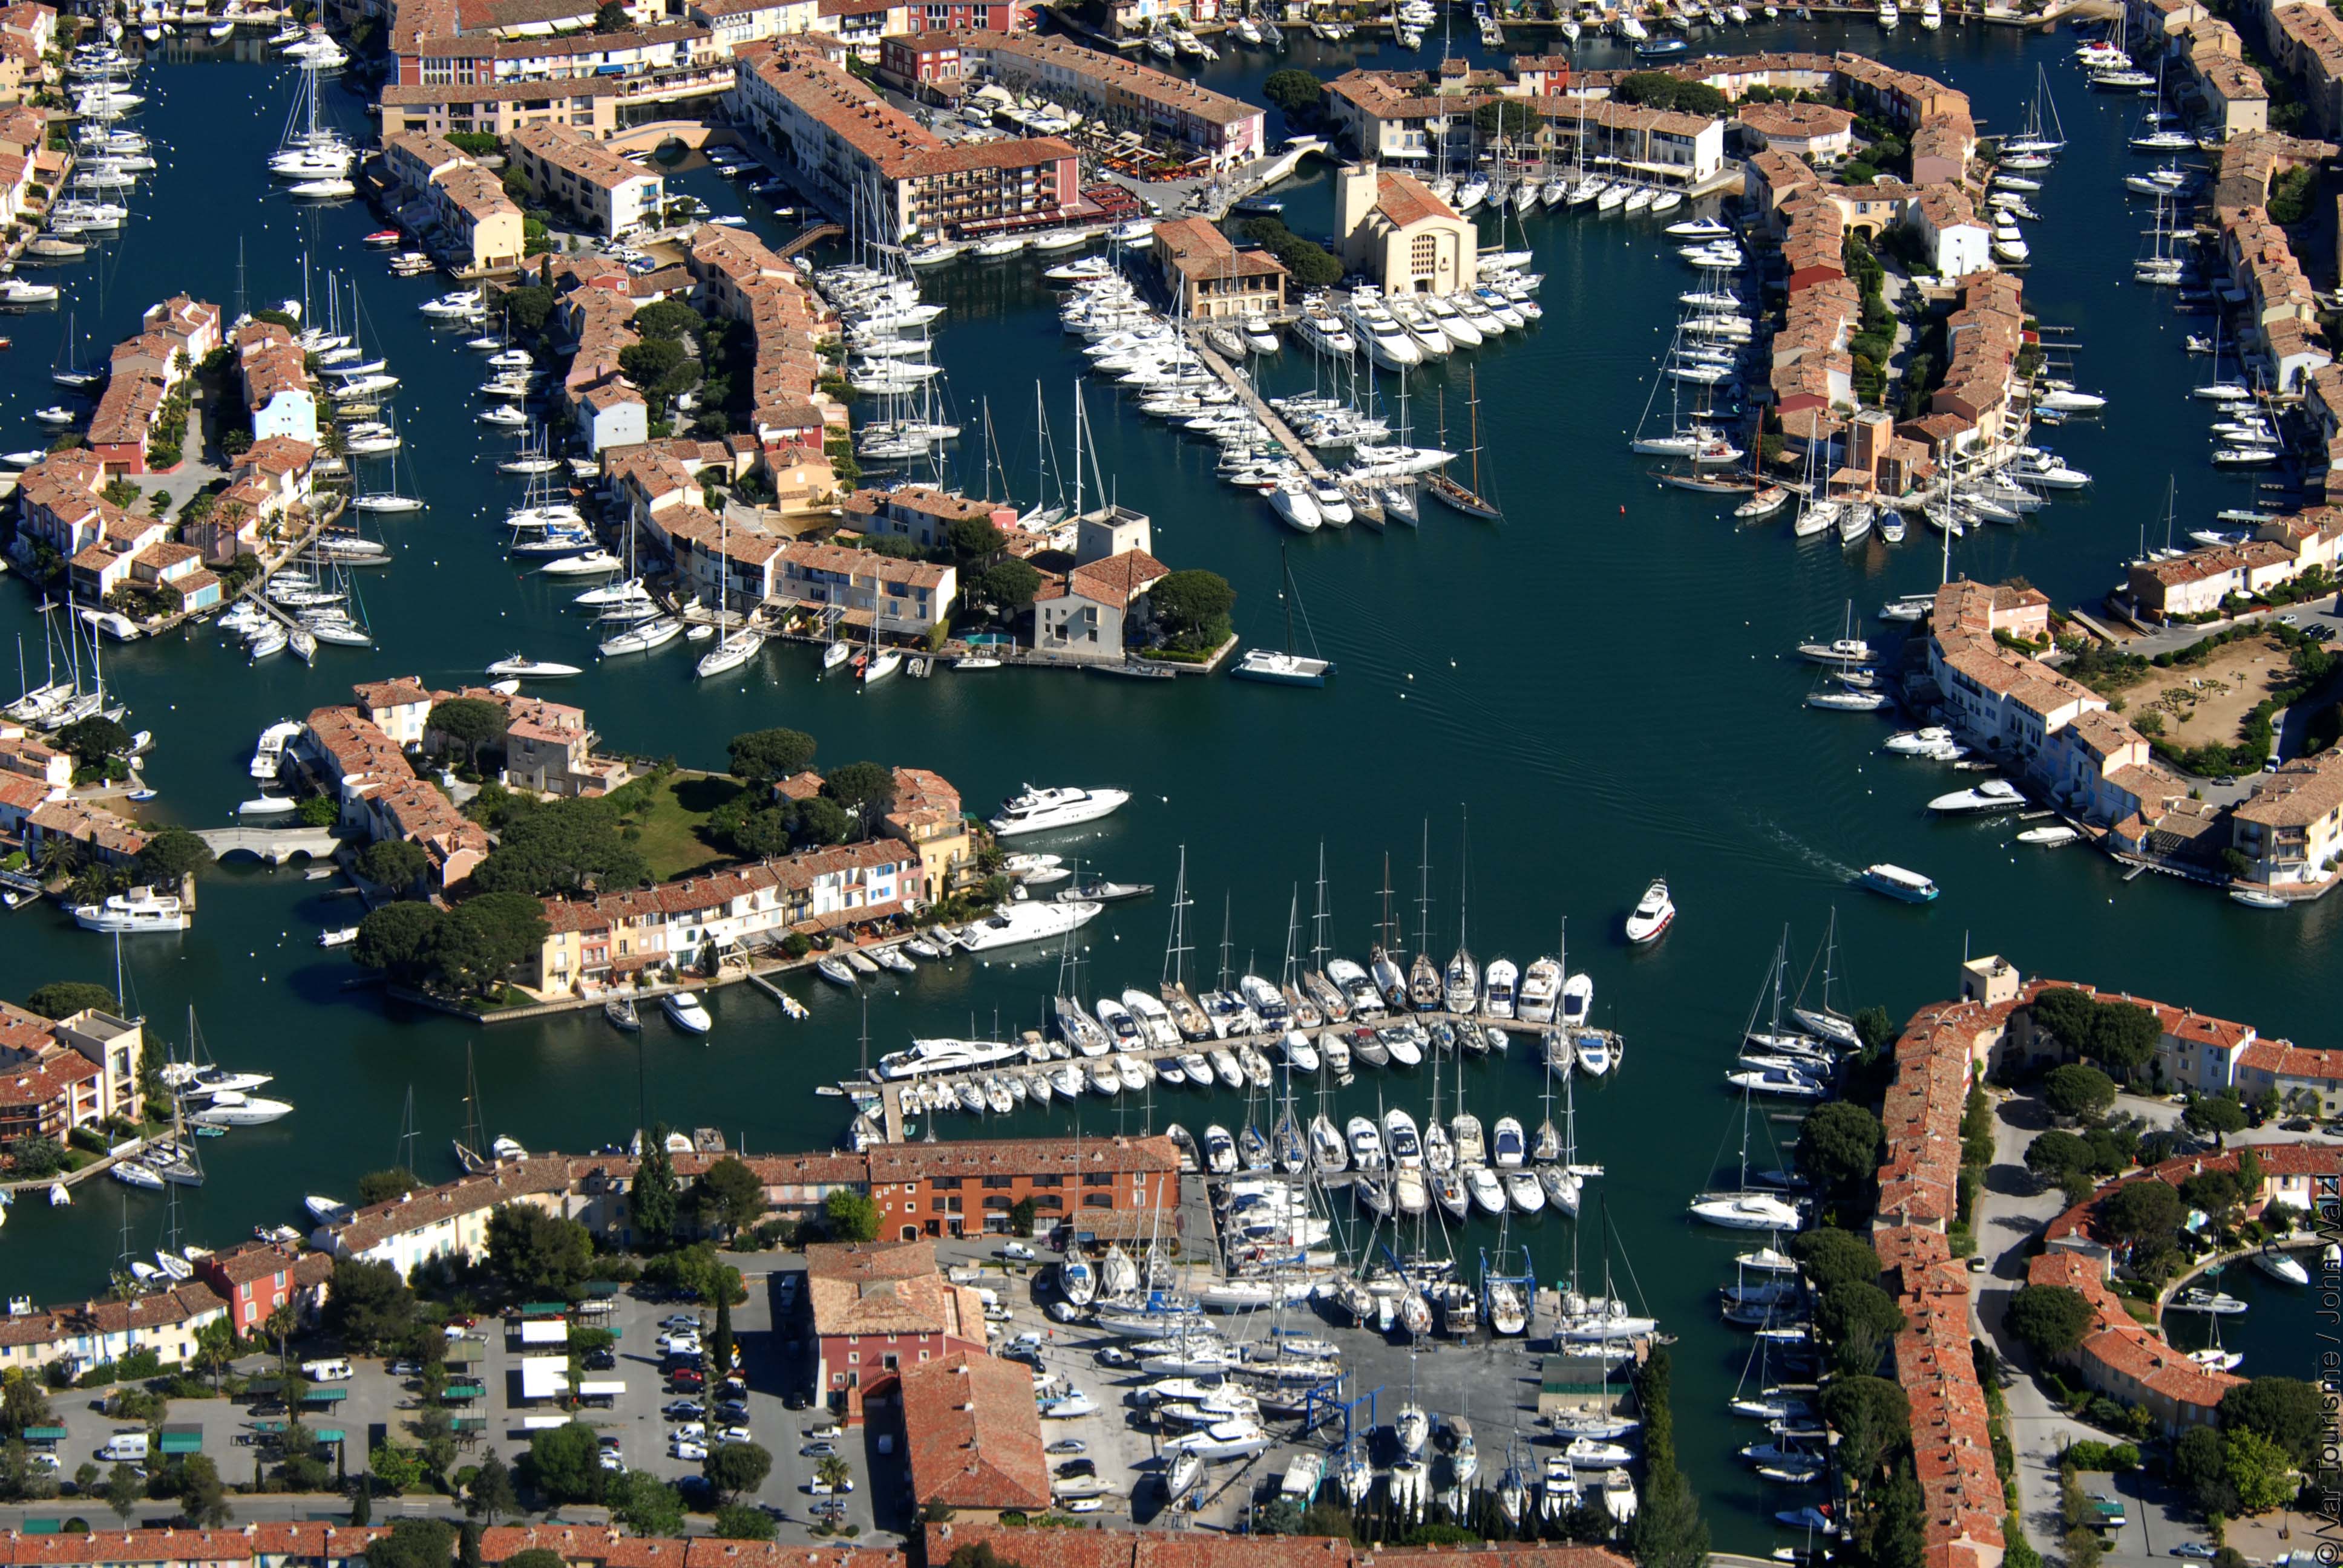 Saint-Tropez and Port Grimaud: Must-see in Var Provence - Var Provence  Cruise Club EN